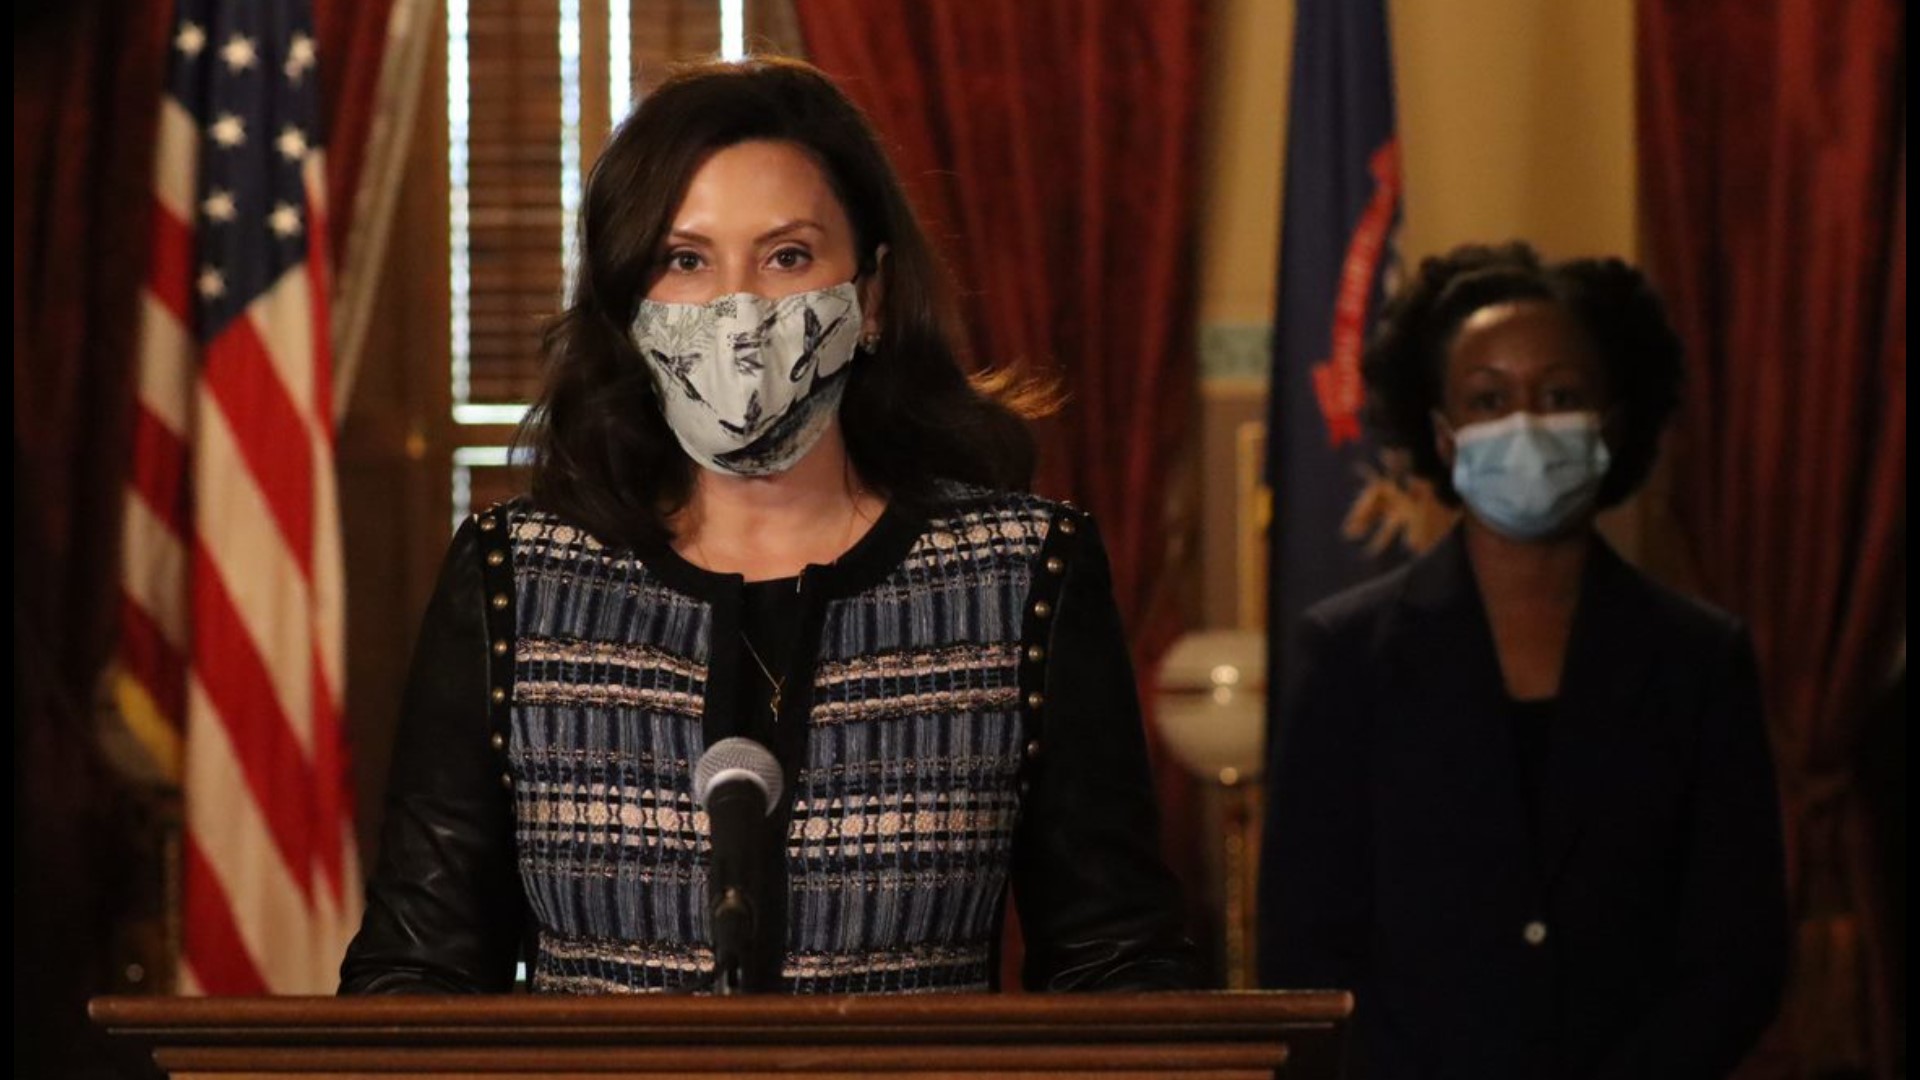 Gov. Gretchen Whitmer is urging Michiganders to stay vigilant and continue to wear masks as COVID-19 cases rise.